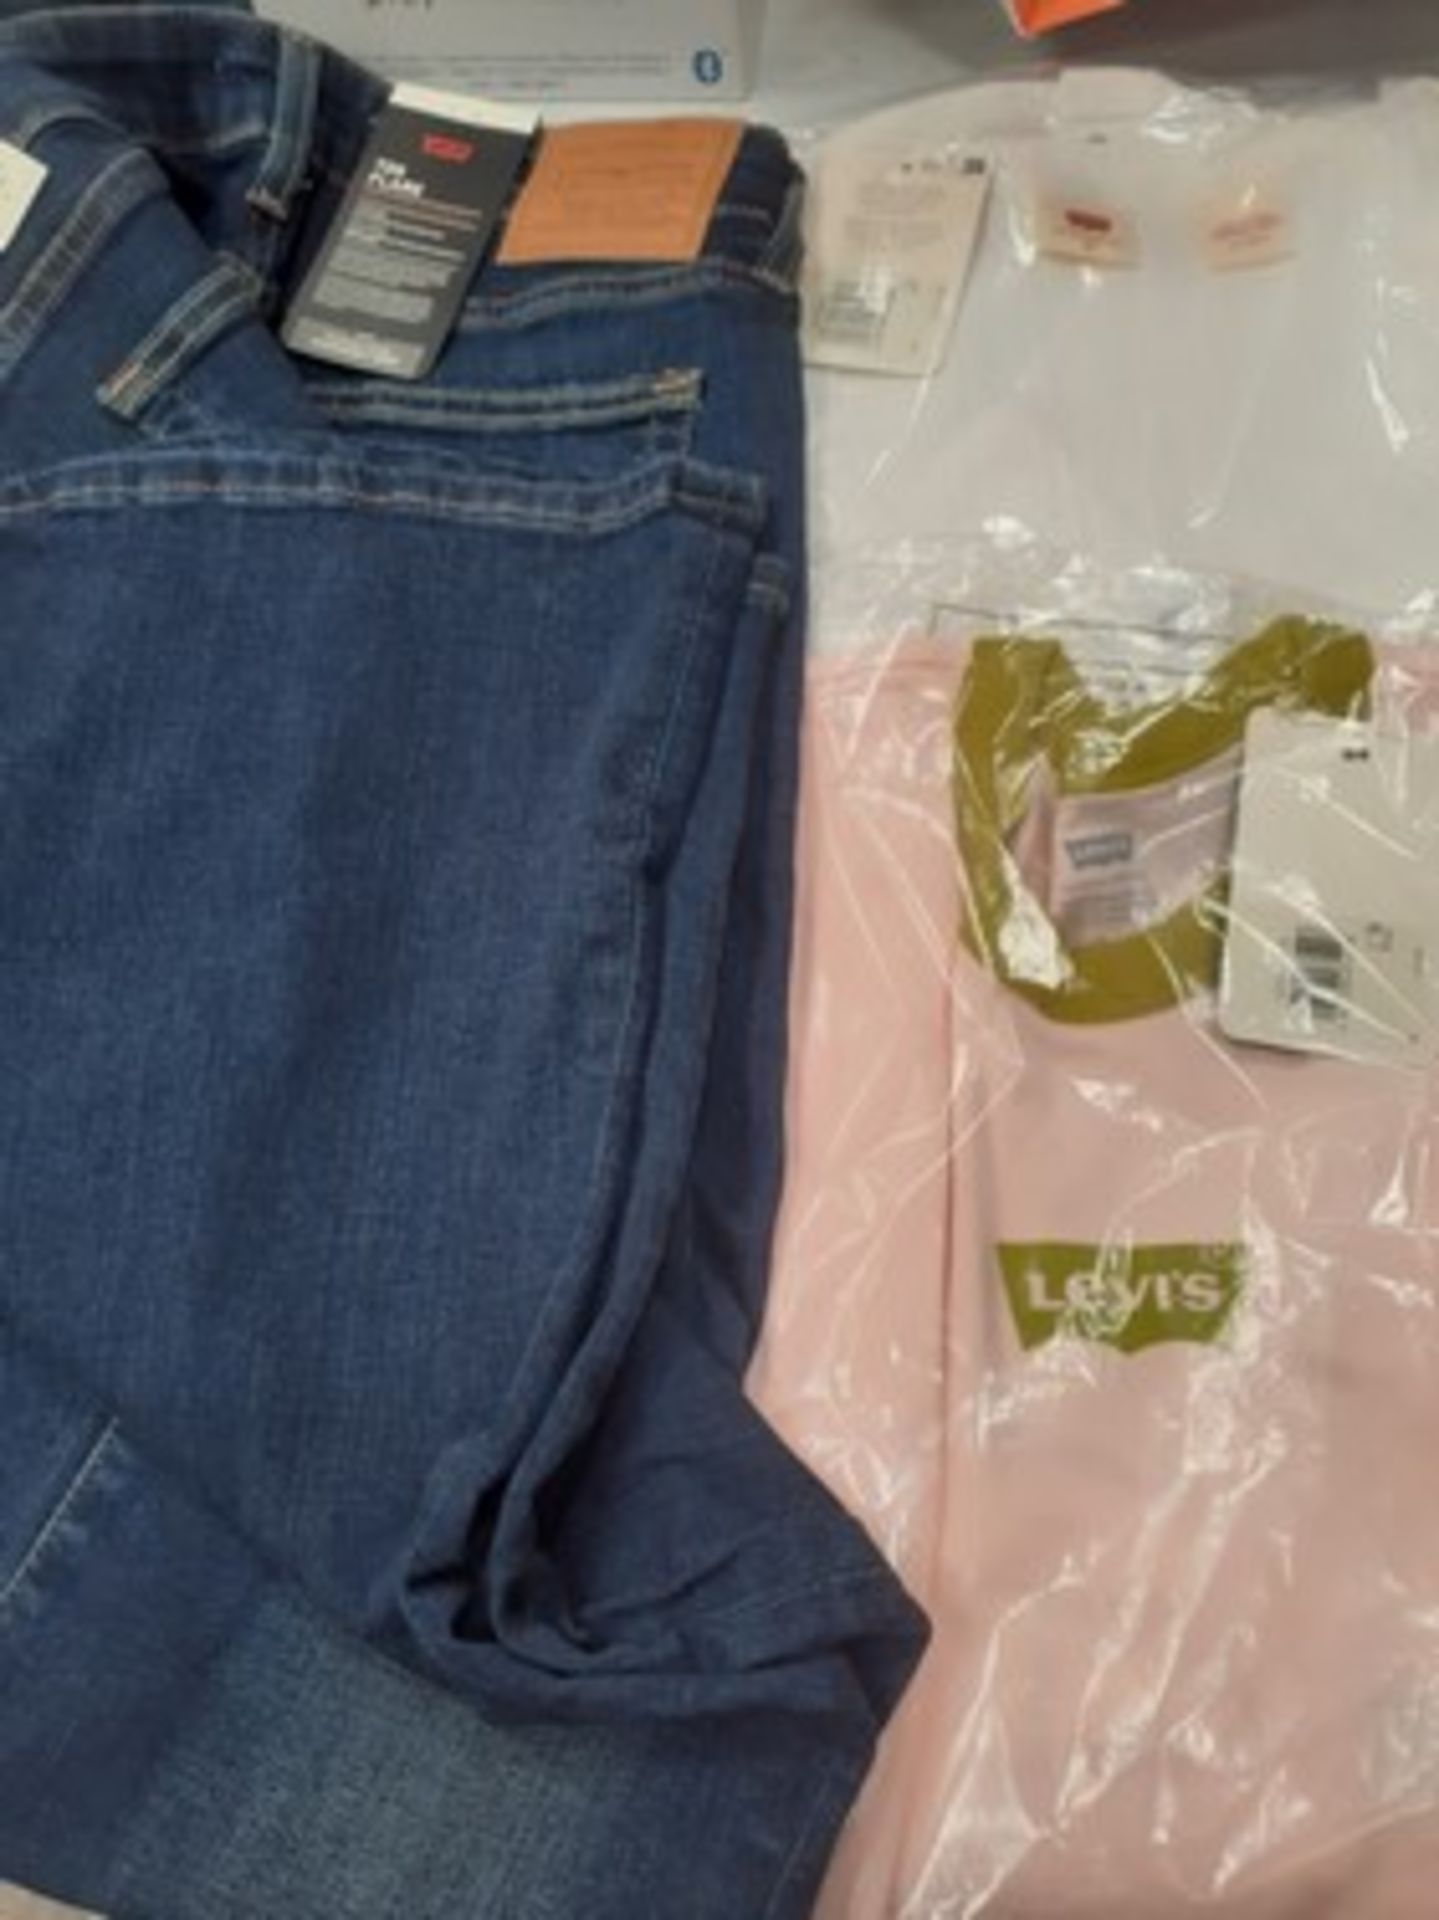 3 x items of Levi clothing, comprising 1 x pair Levi 726 flare jeans, size 30 x 30, 1 x Pointelle